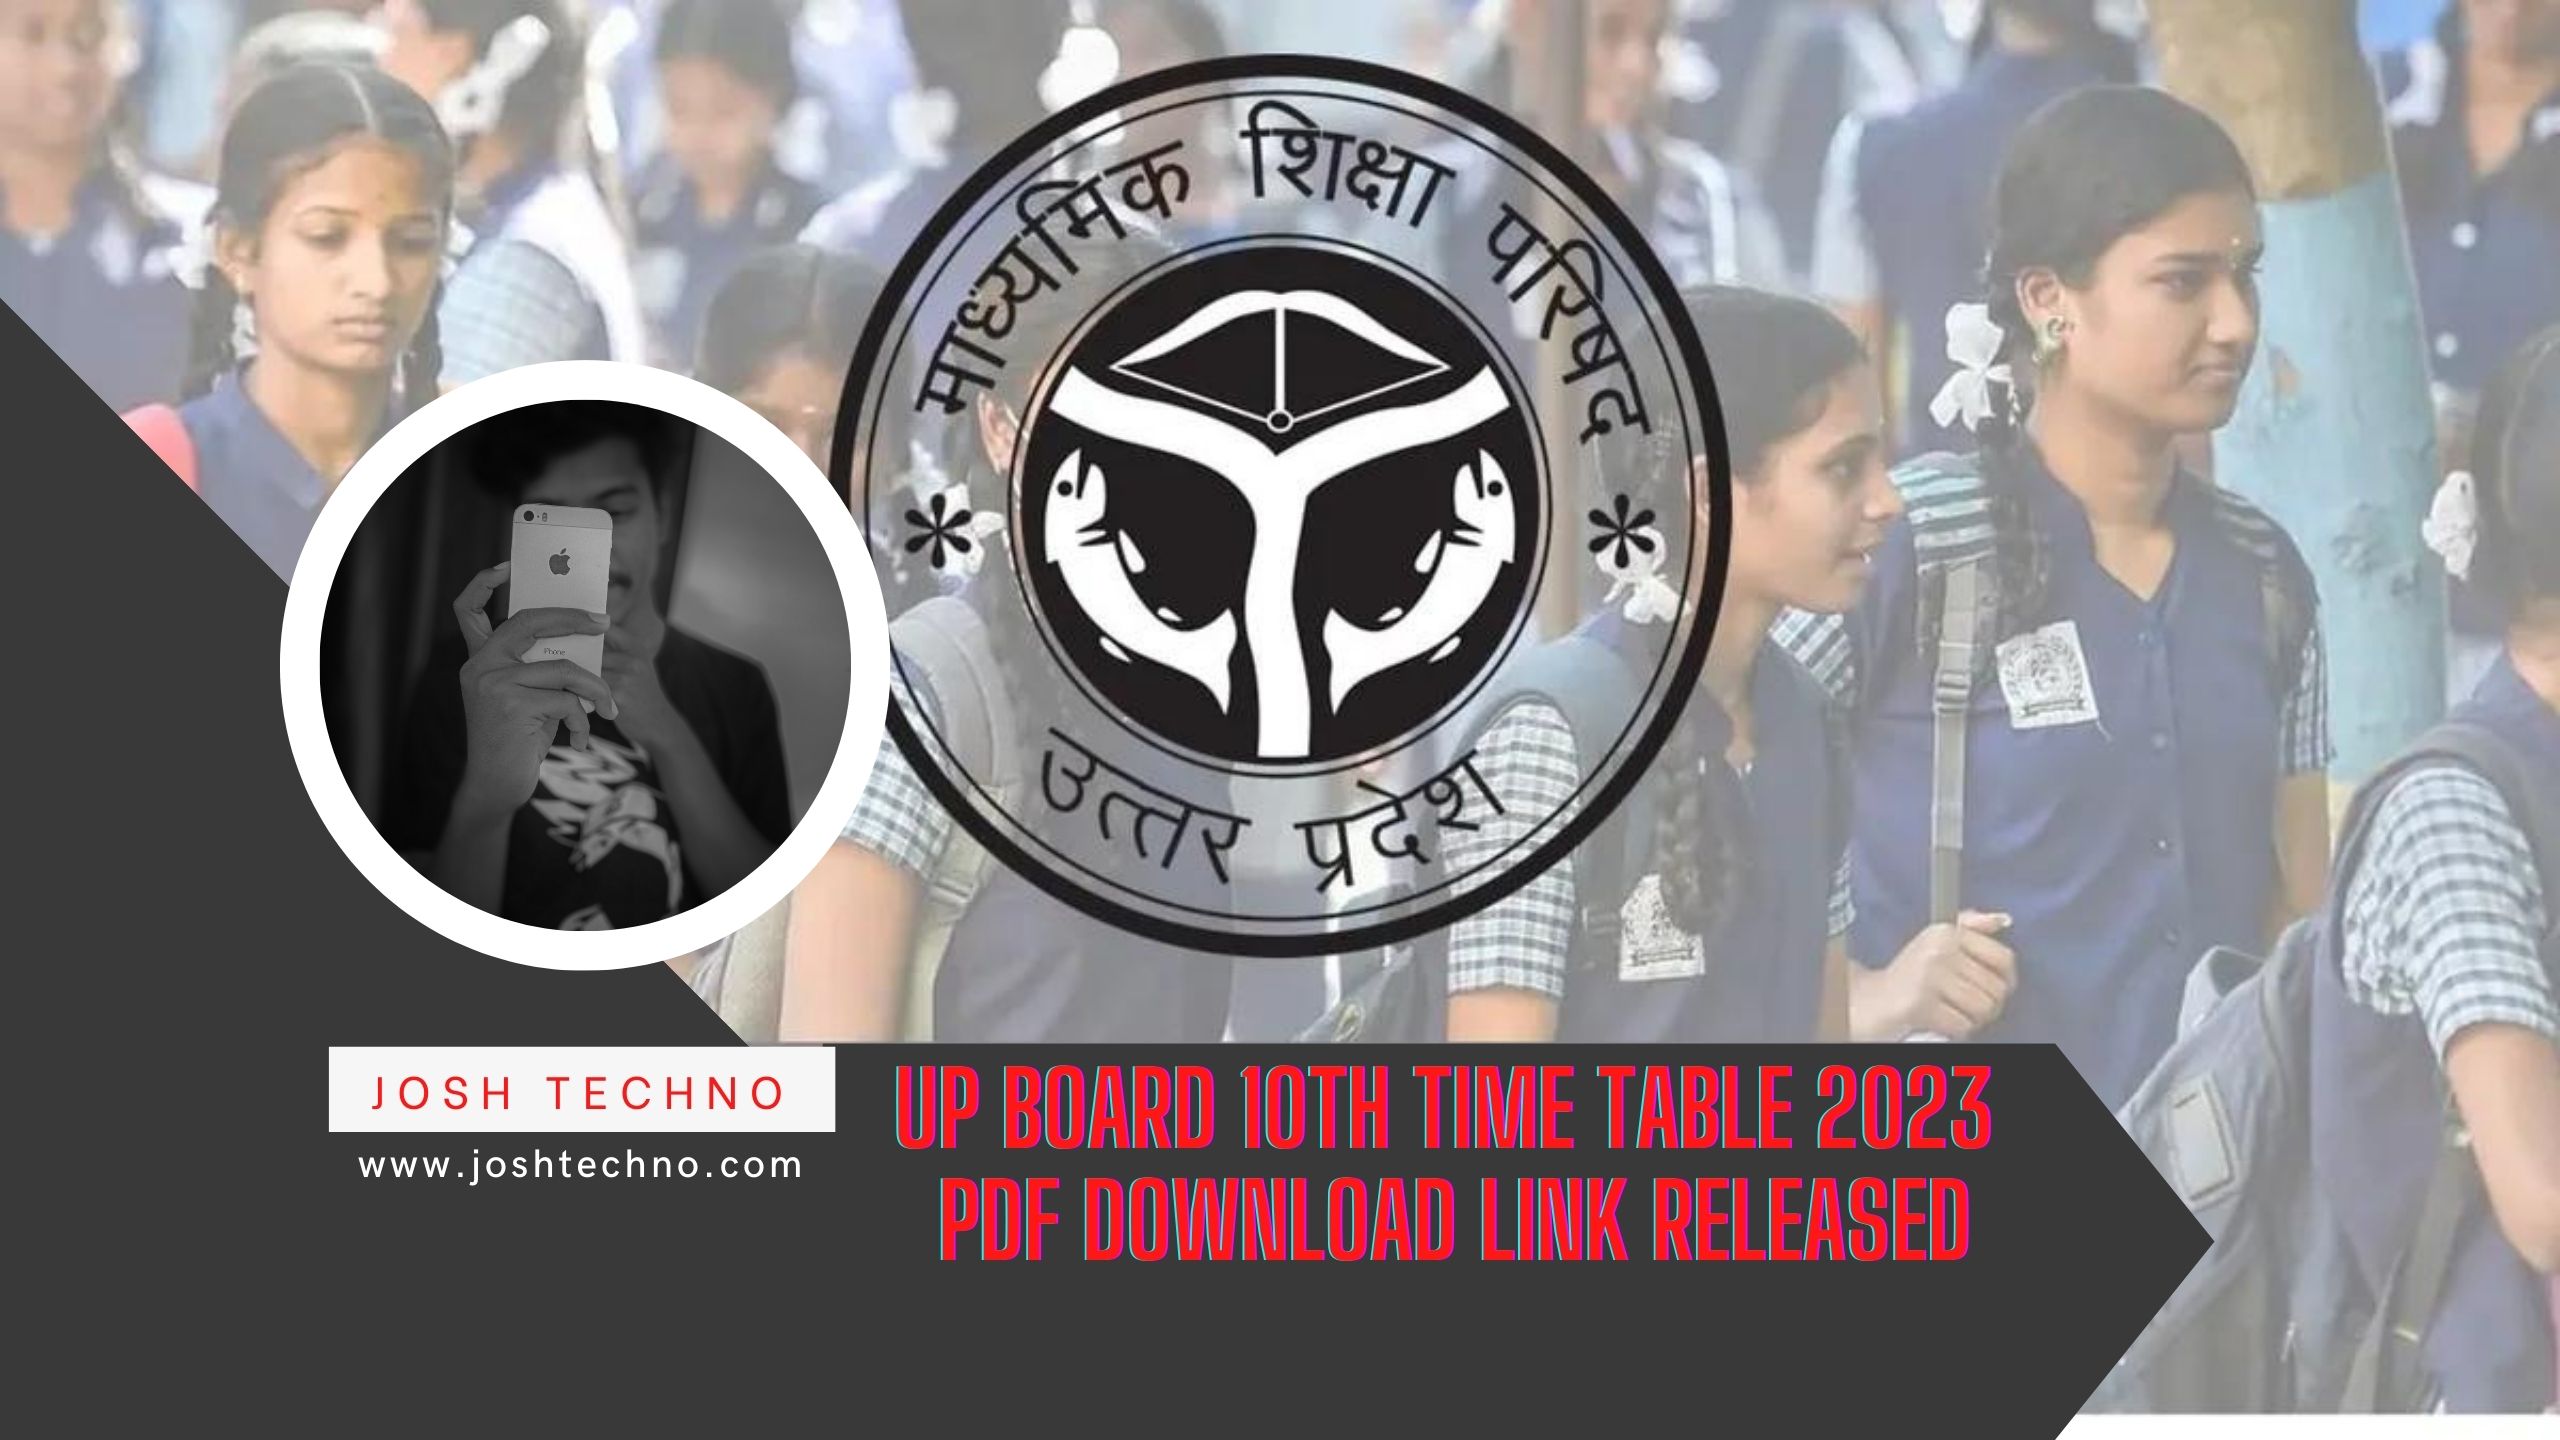 UP Board 10th Time Table 2023 PDF Download Link Released